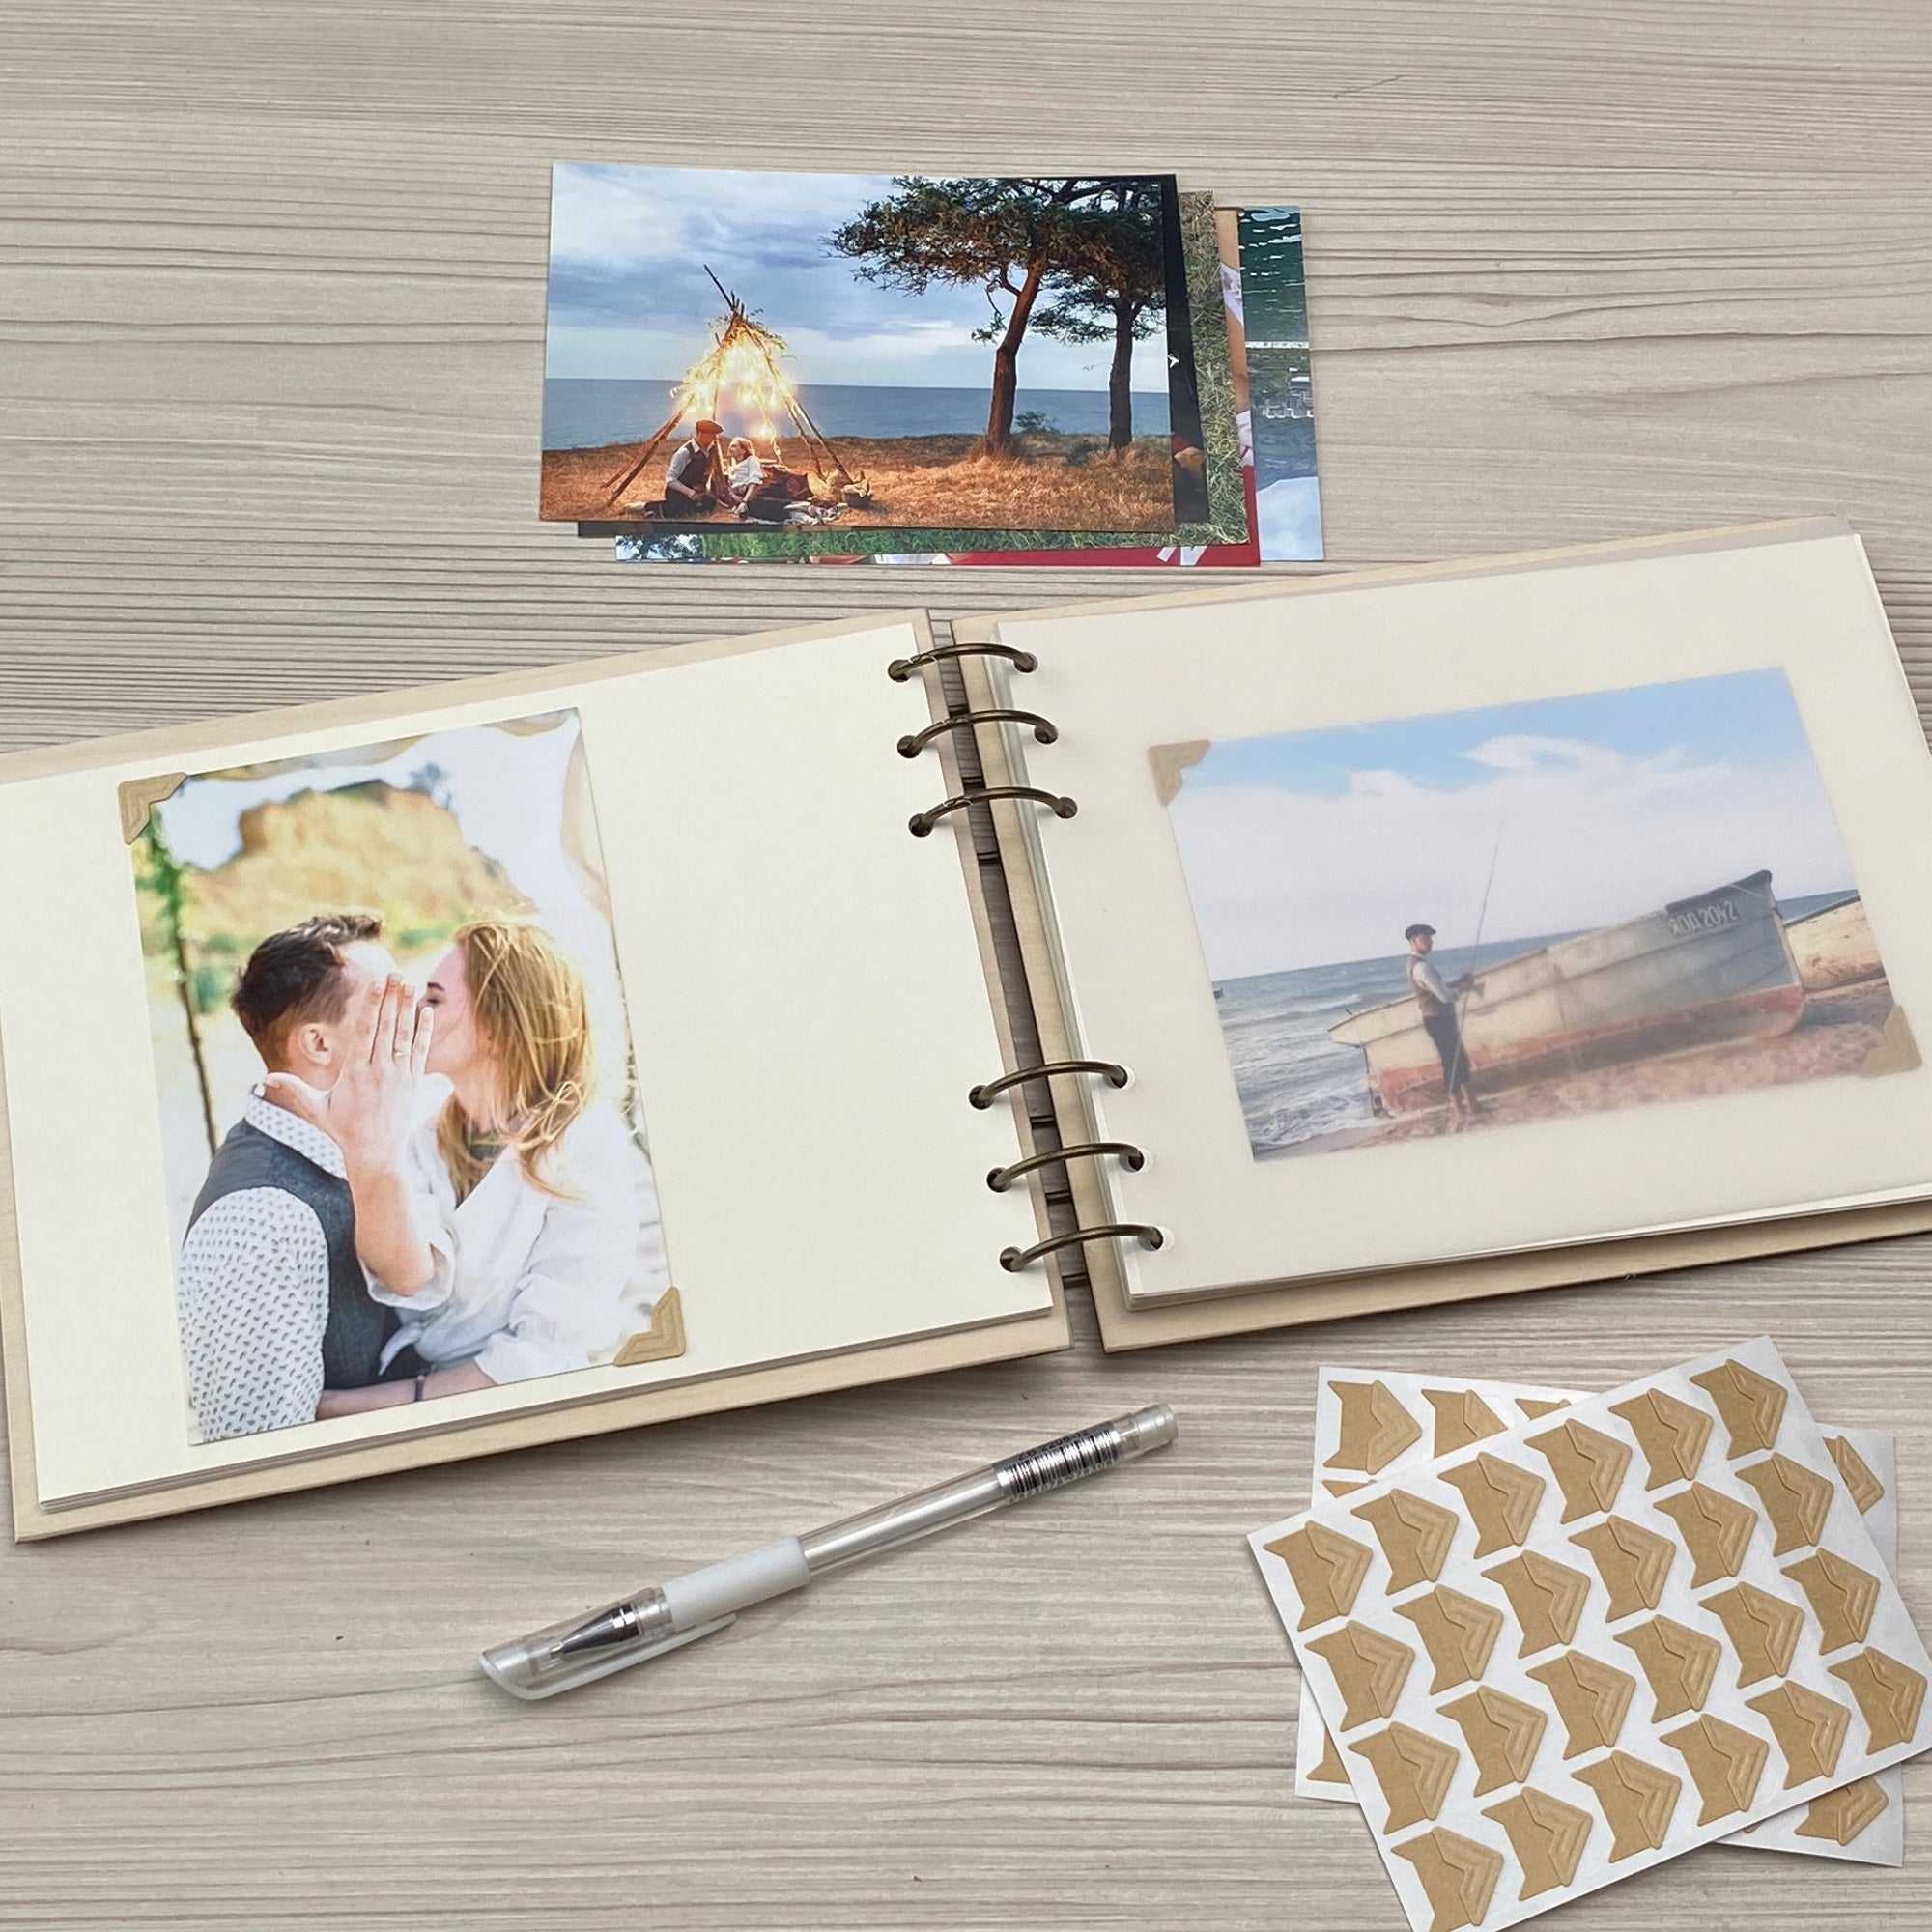 Personalized photo album cover and Family engraving